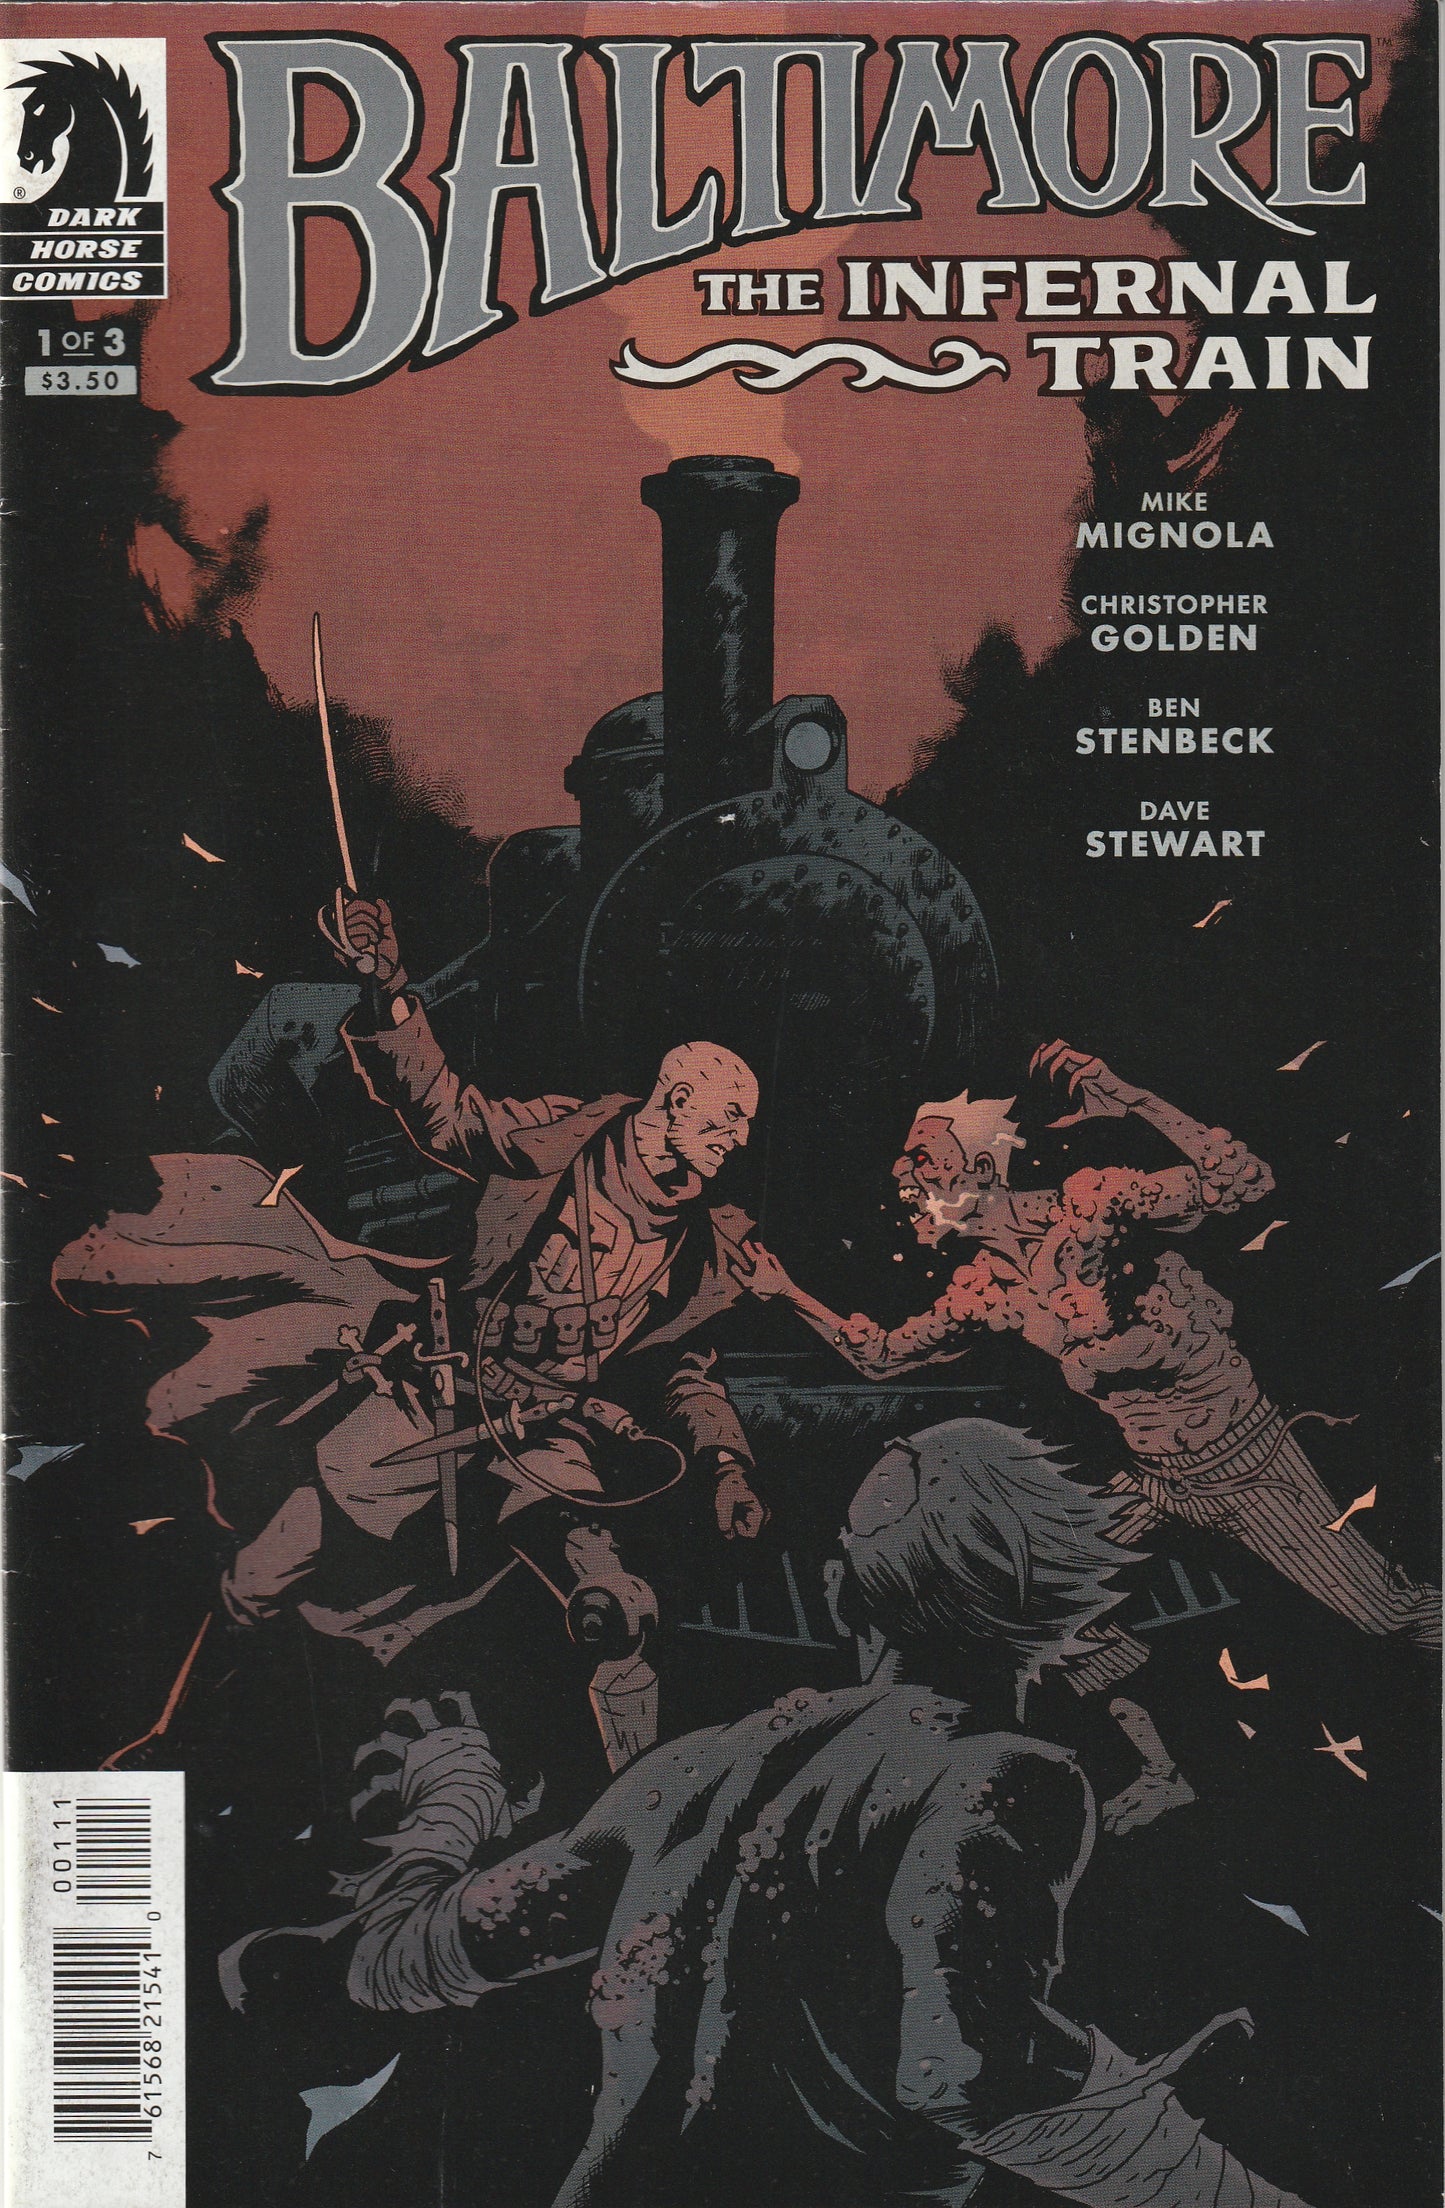 Baltimore: The Play (one-shot) (2012) - Mike Mignola